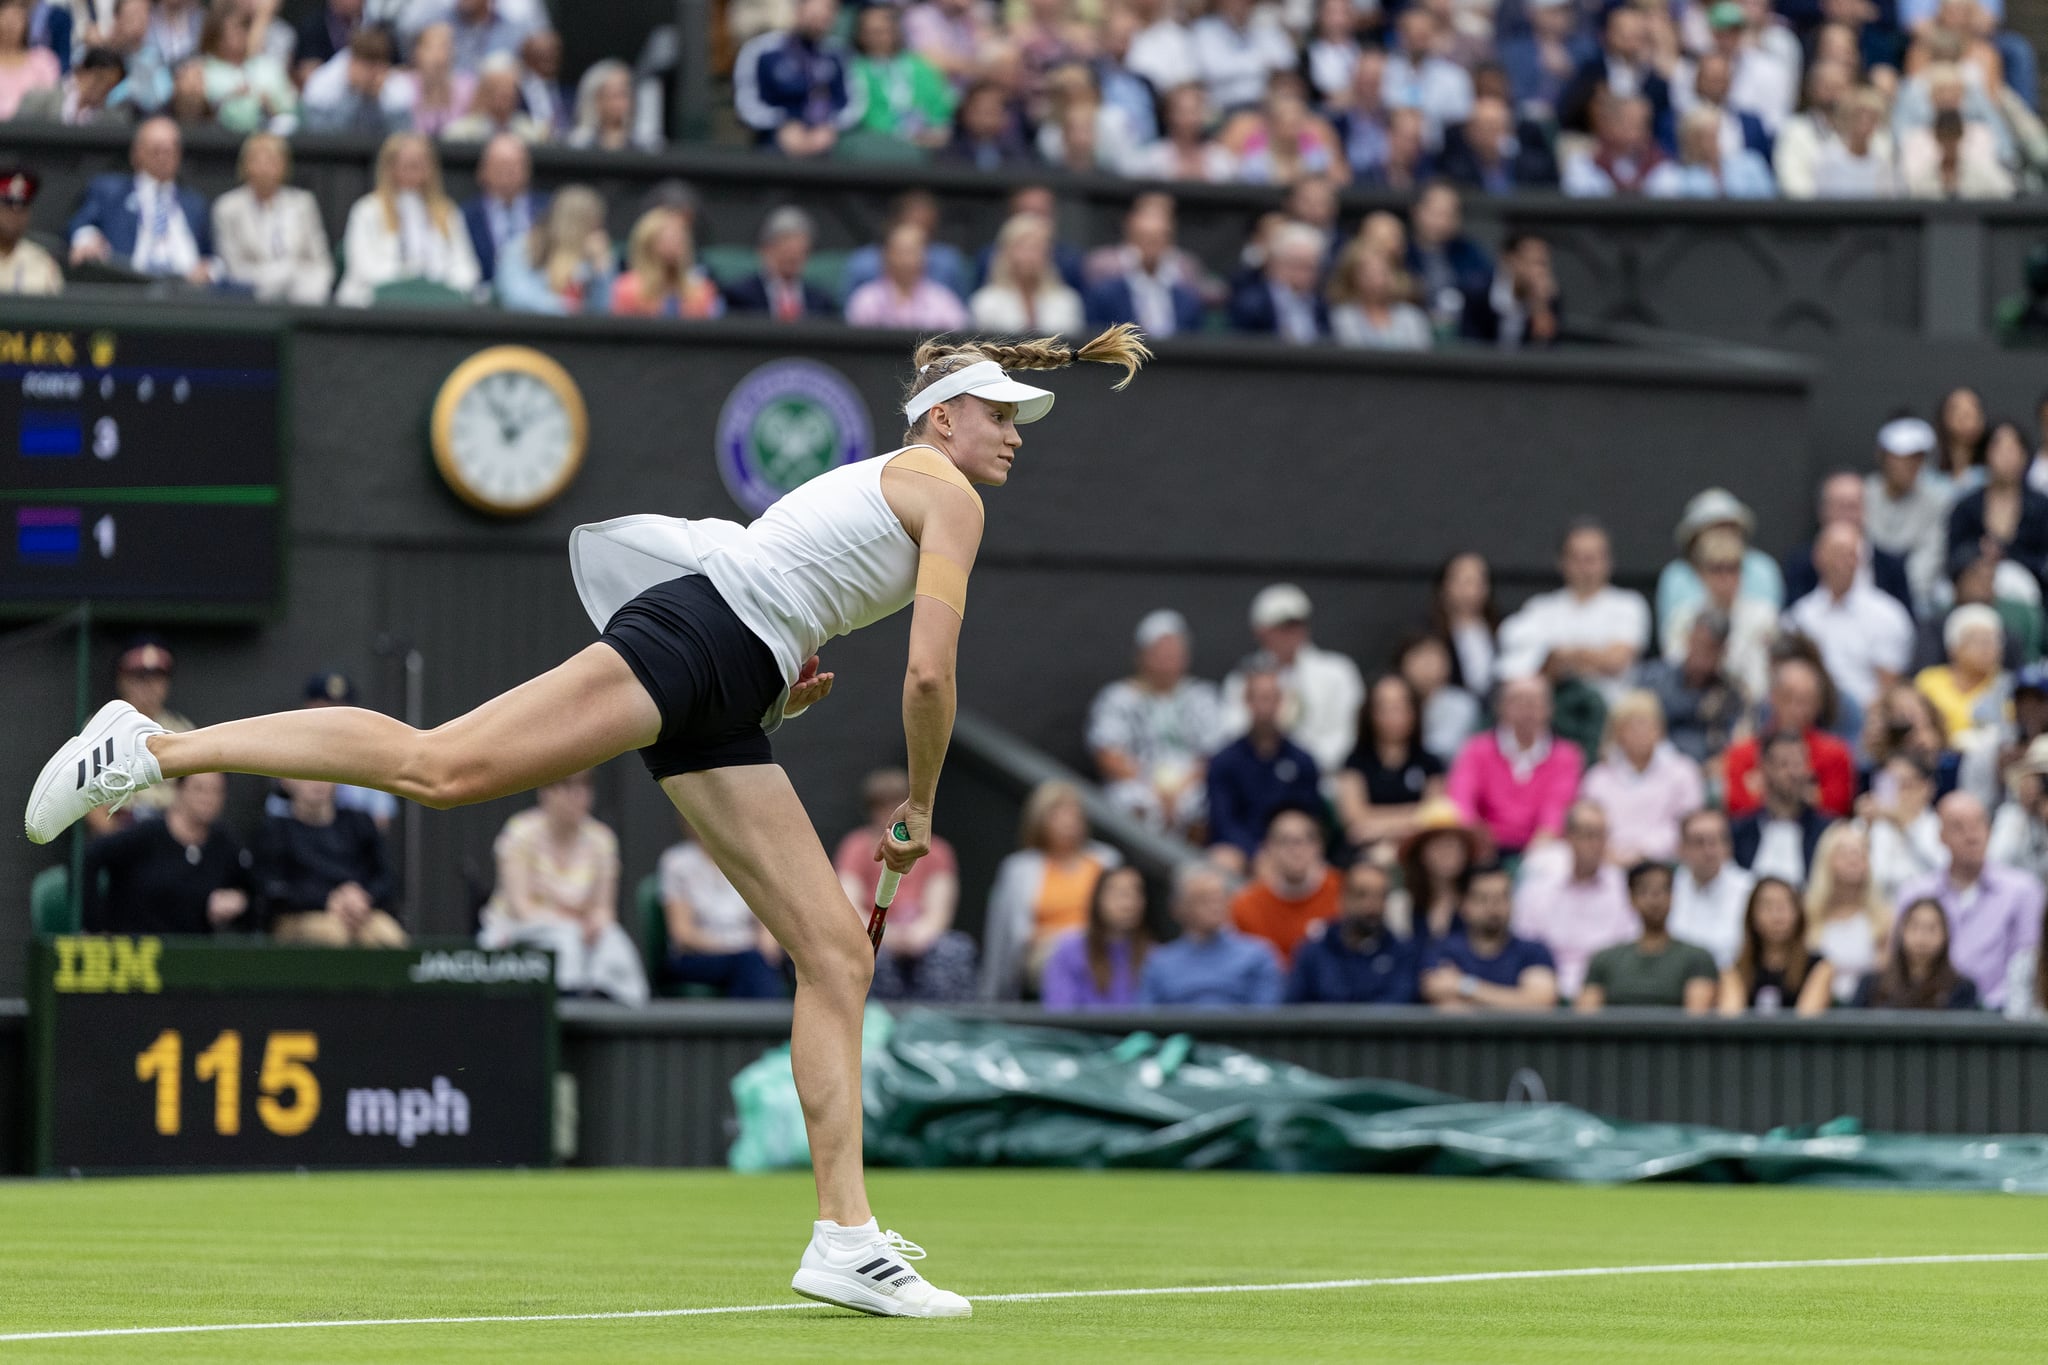 LONDON, ENGLAND - JULY 4.  Elena Rybakina of Kazakhstan serving against Shelby Rogers of the United States in the Ladies' Singles first round match on Centre Court during the Wimbledon Lawn Tennis Championships at the All England Lawn Tennis and Croquet Club at Wimbledon on July 04, 2023, in London, England. (Photo by Tim Clayton/Corbis via Getty Images)